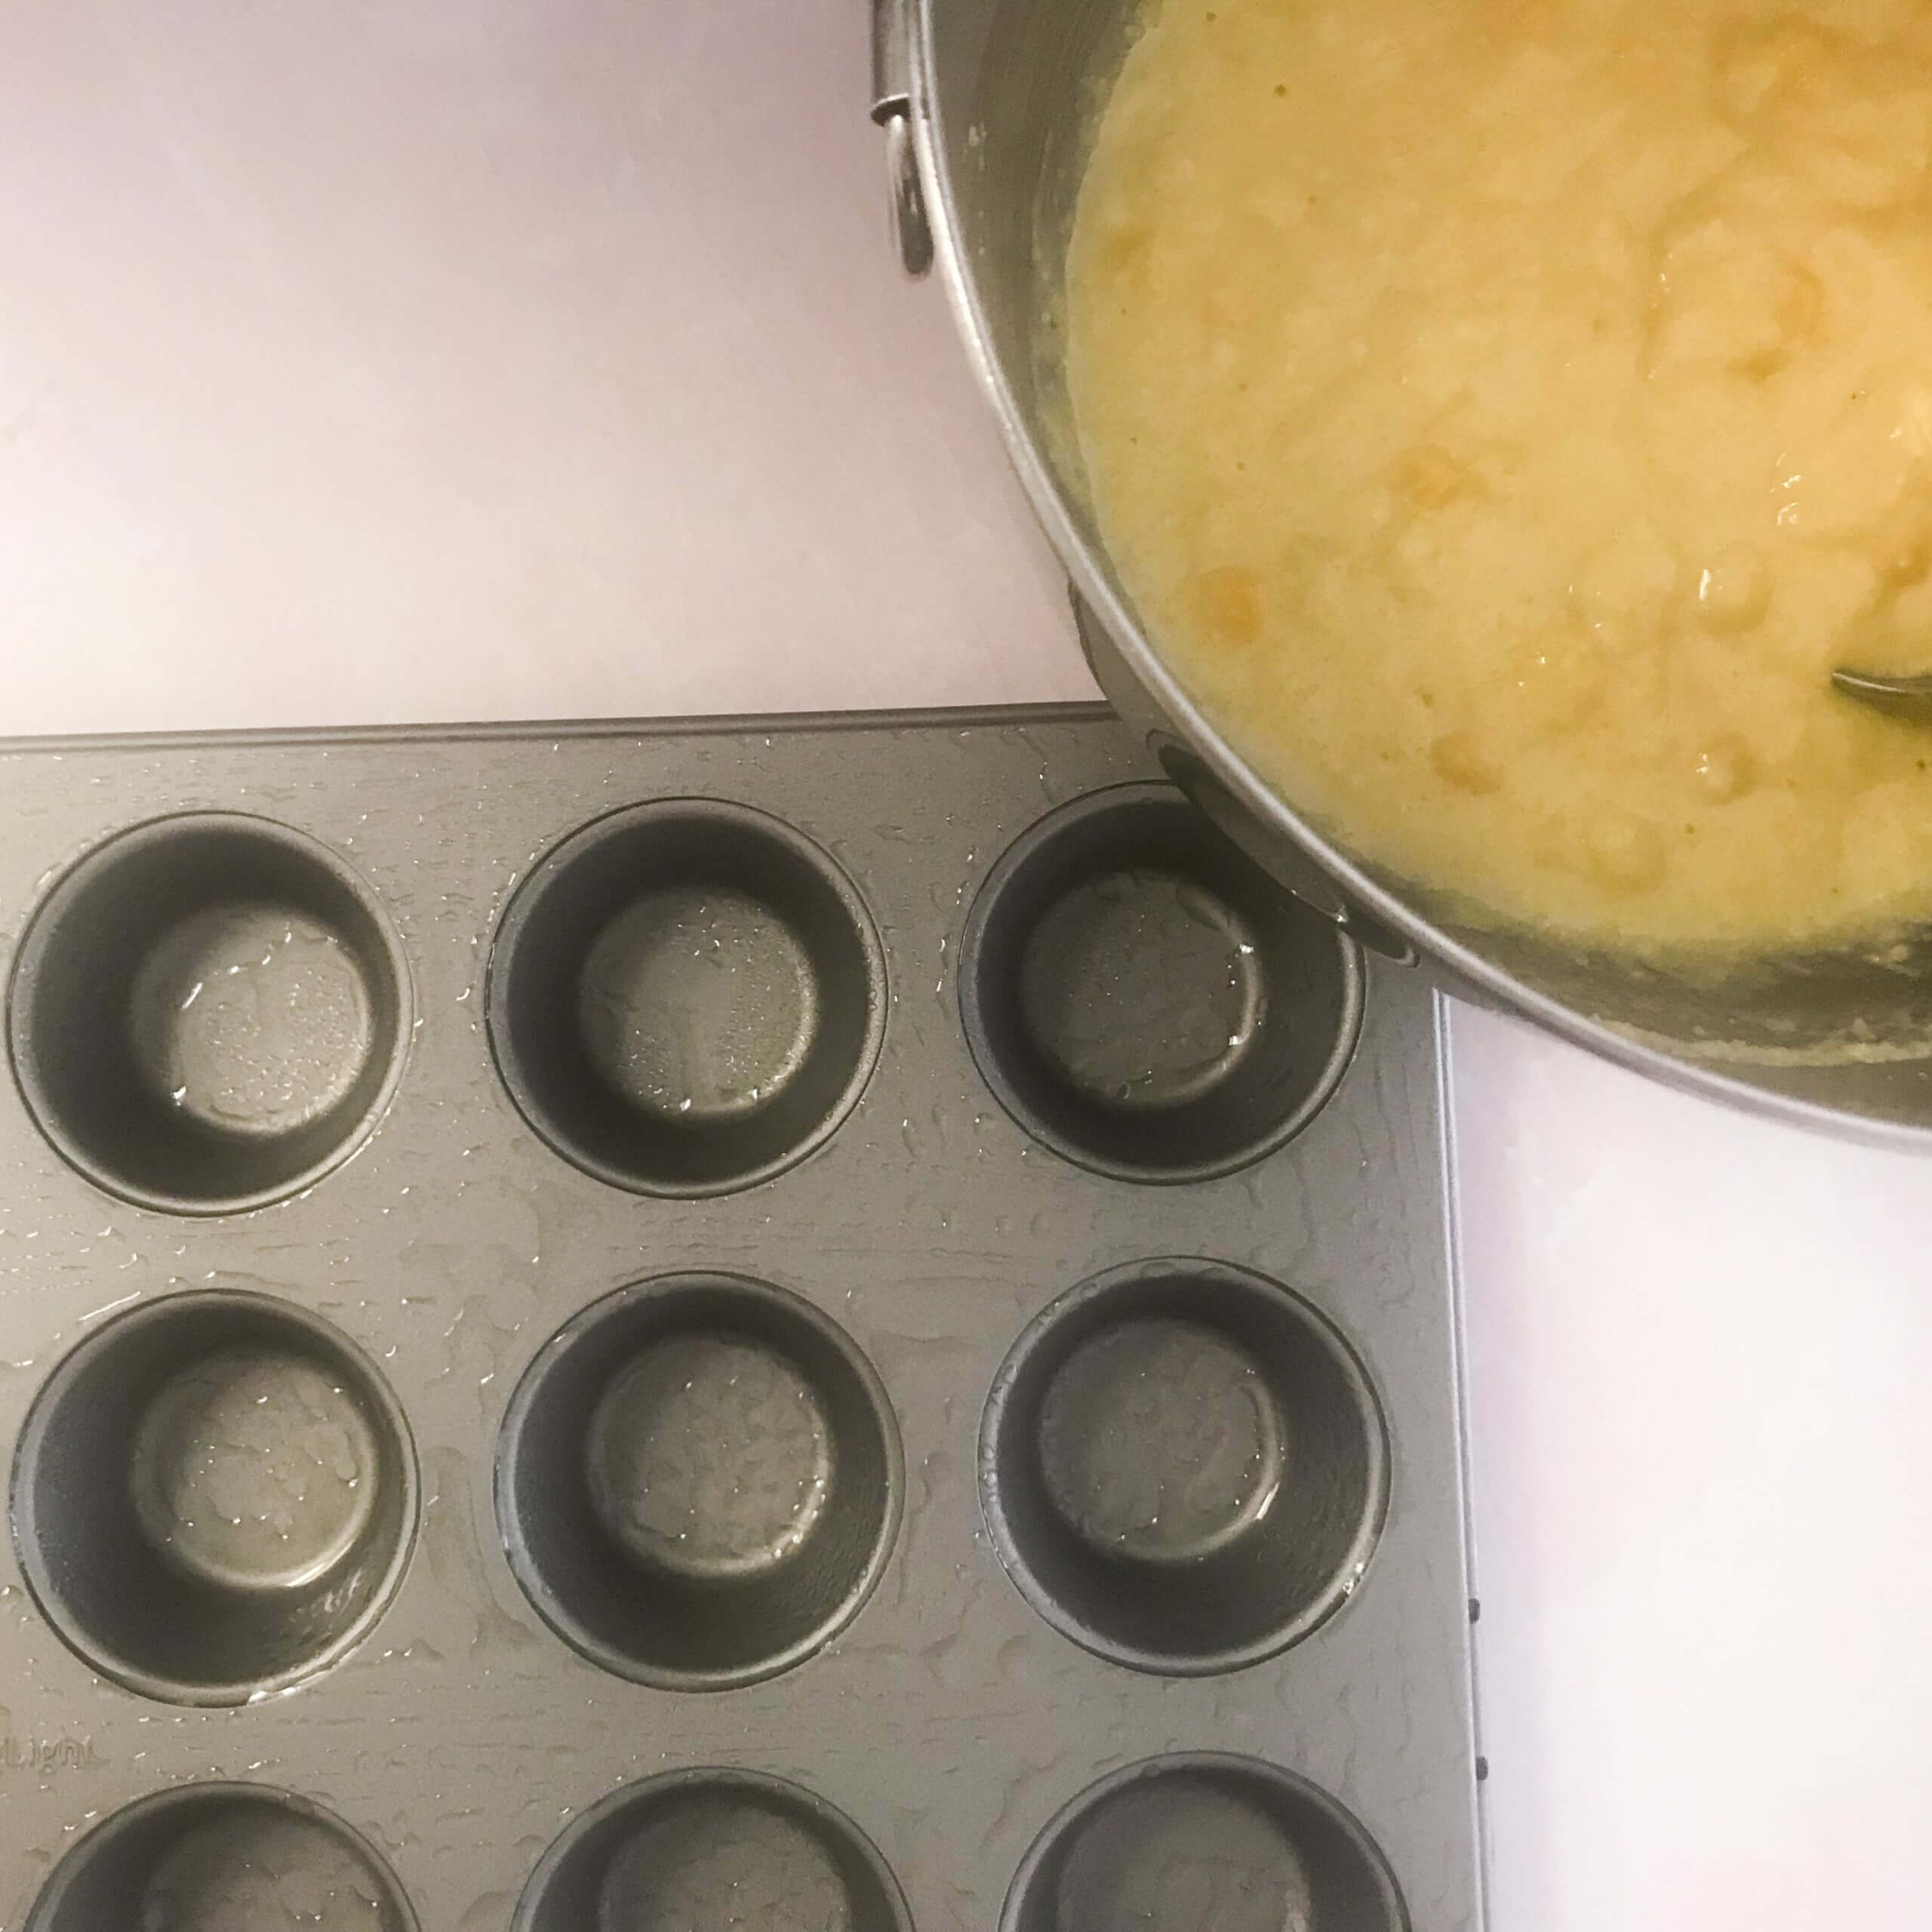 MUFFIN TIN AND BOWL OF CORN MIX